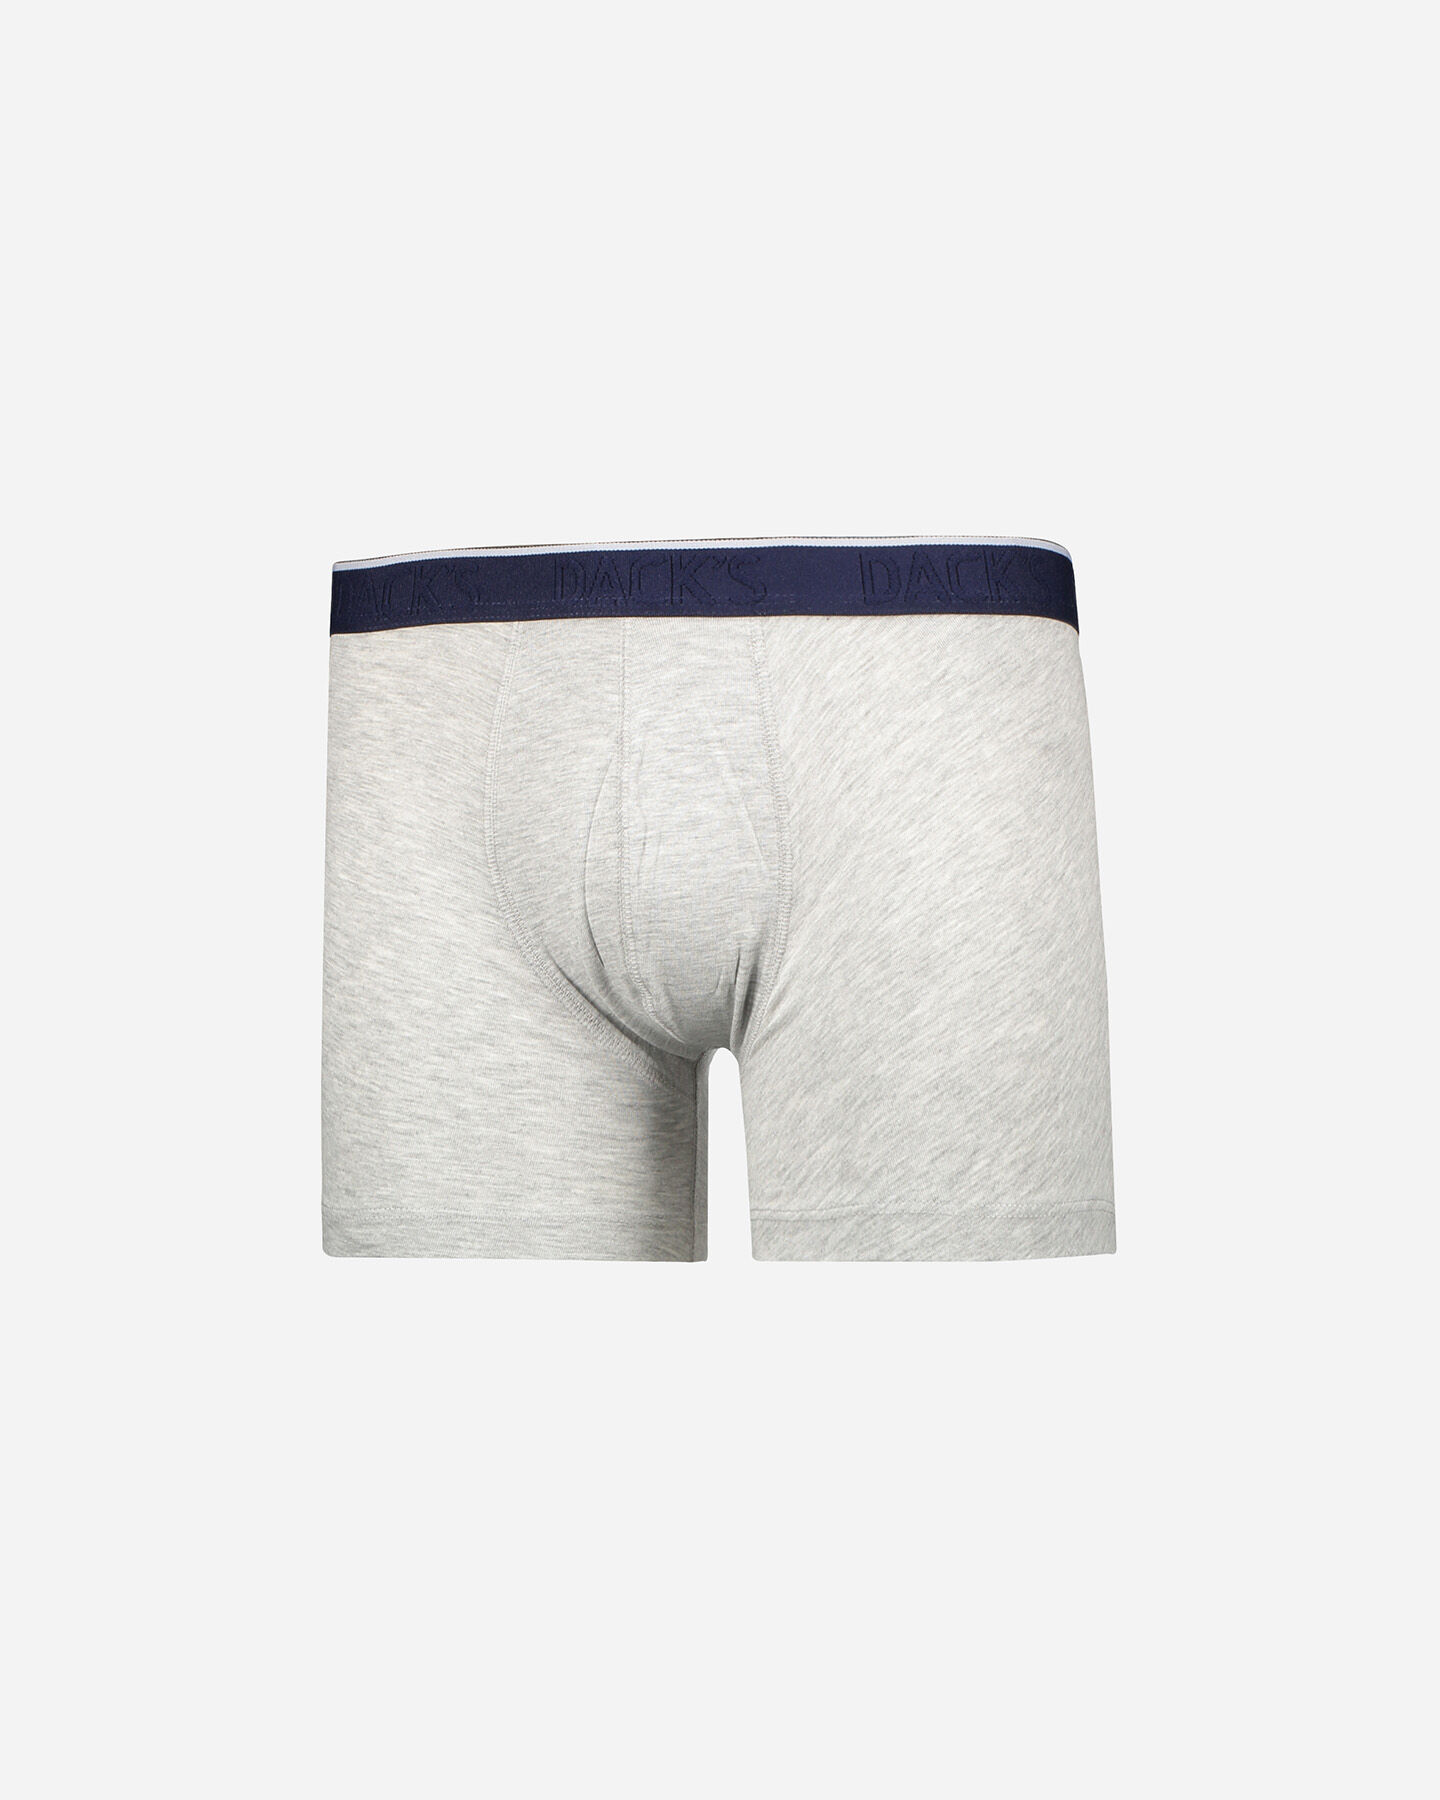  Intimo DACK'S BIPACK BASIC BOXER M S4061965|519/GM01|XL scatto 1